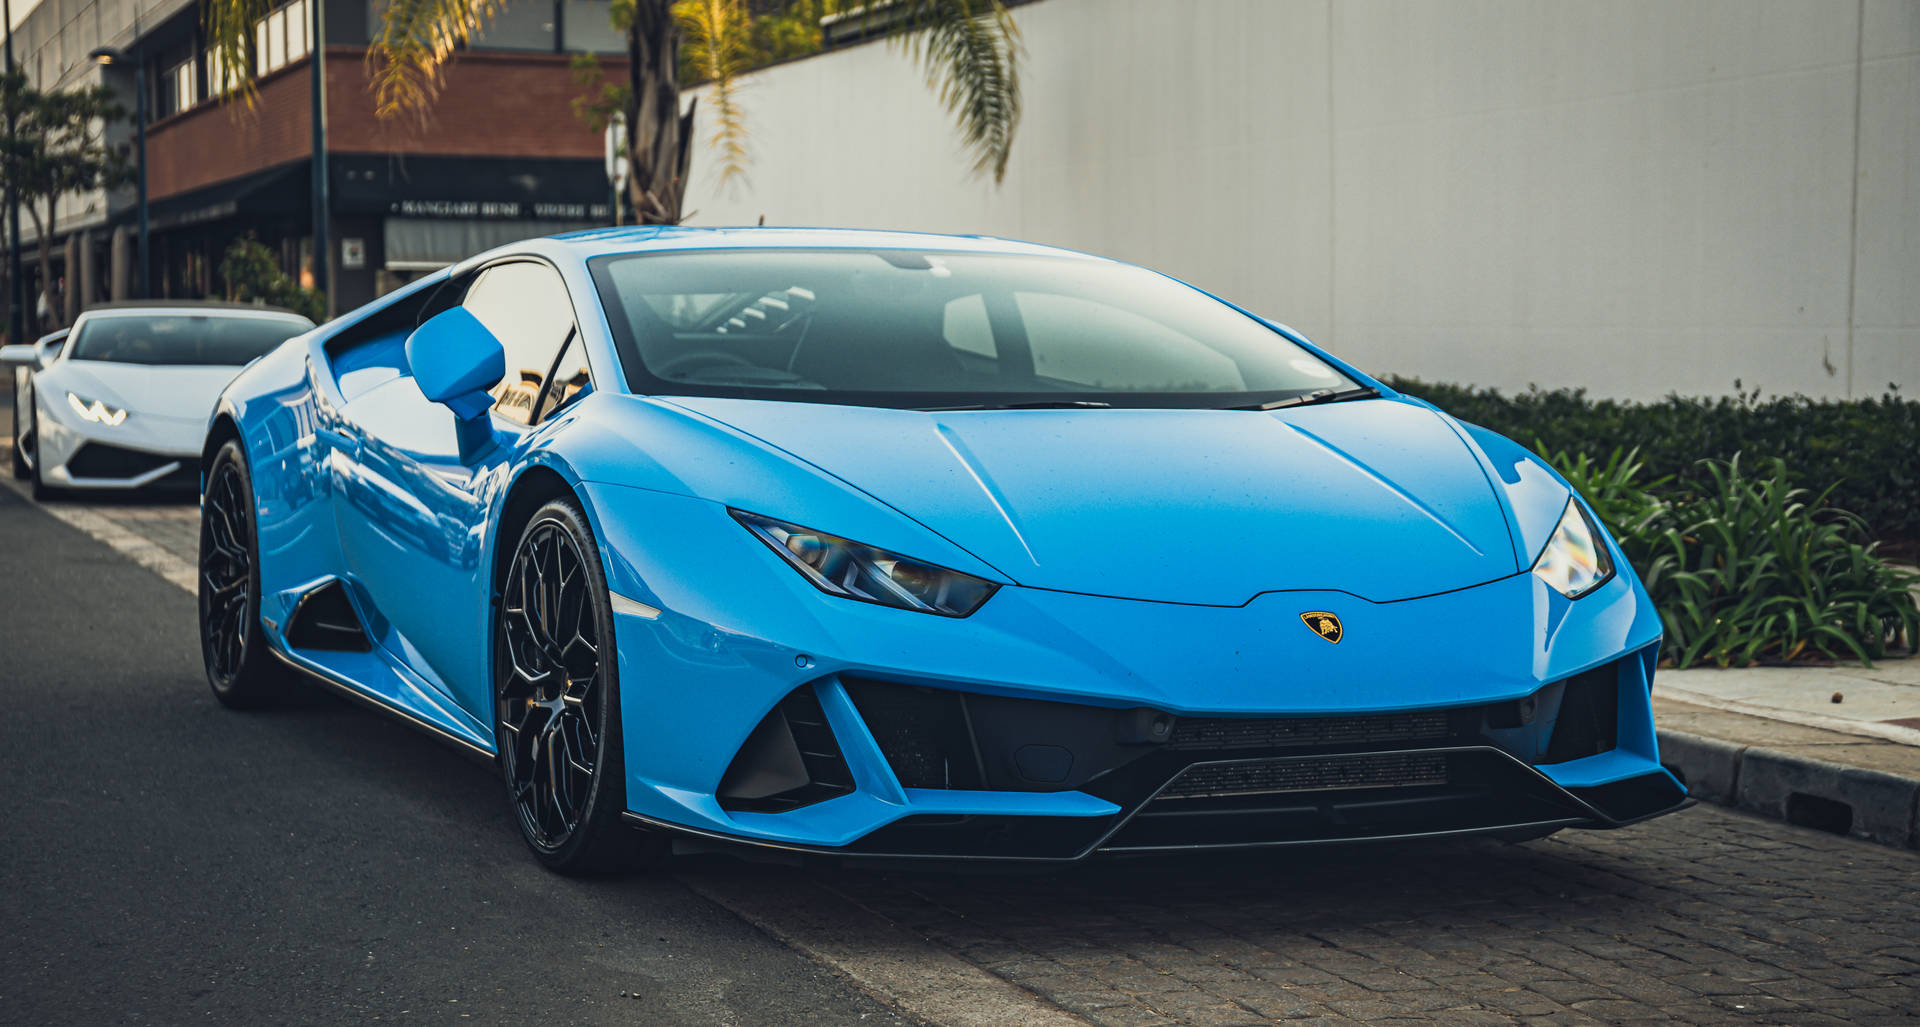 Enjoy The Open Road With An Exotic Blue Lamborghini Aventador. Background